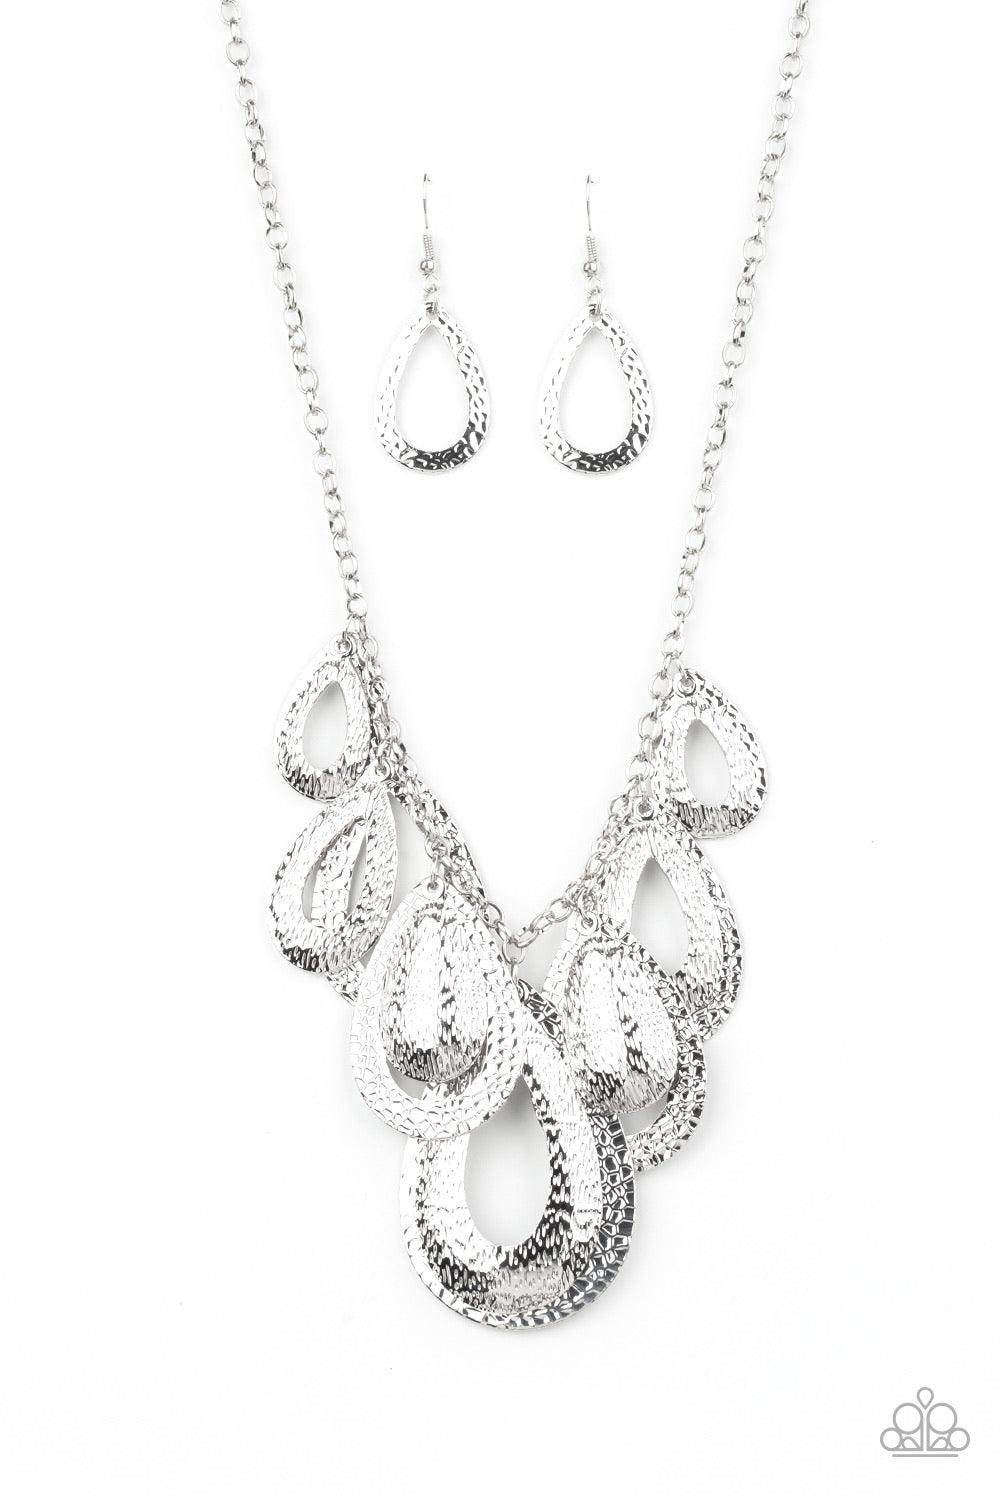 Teardrop Tempest ~Silver - Beautifully Blinged